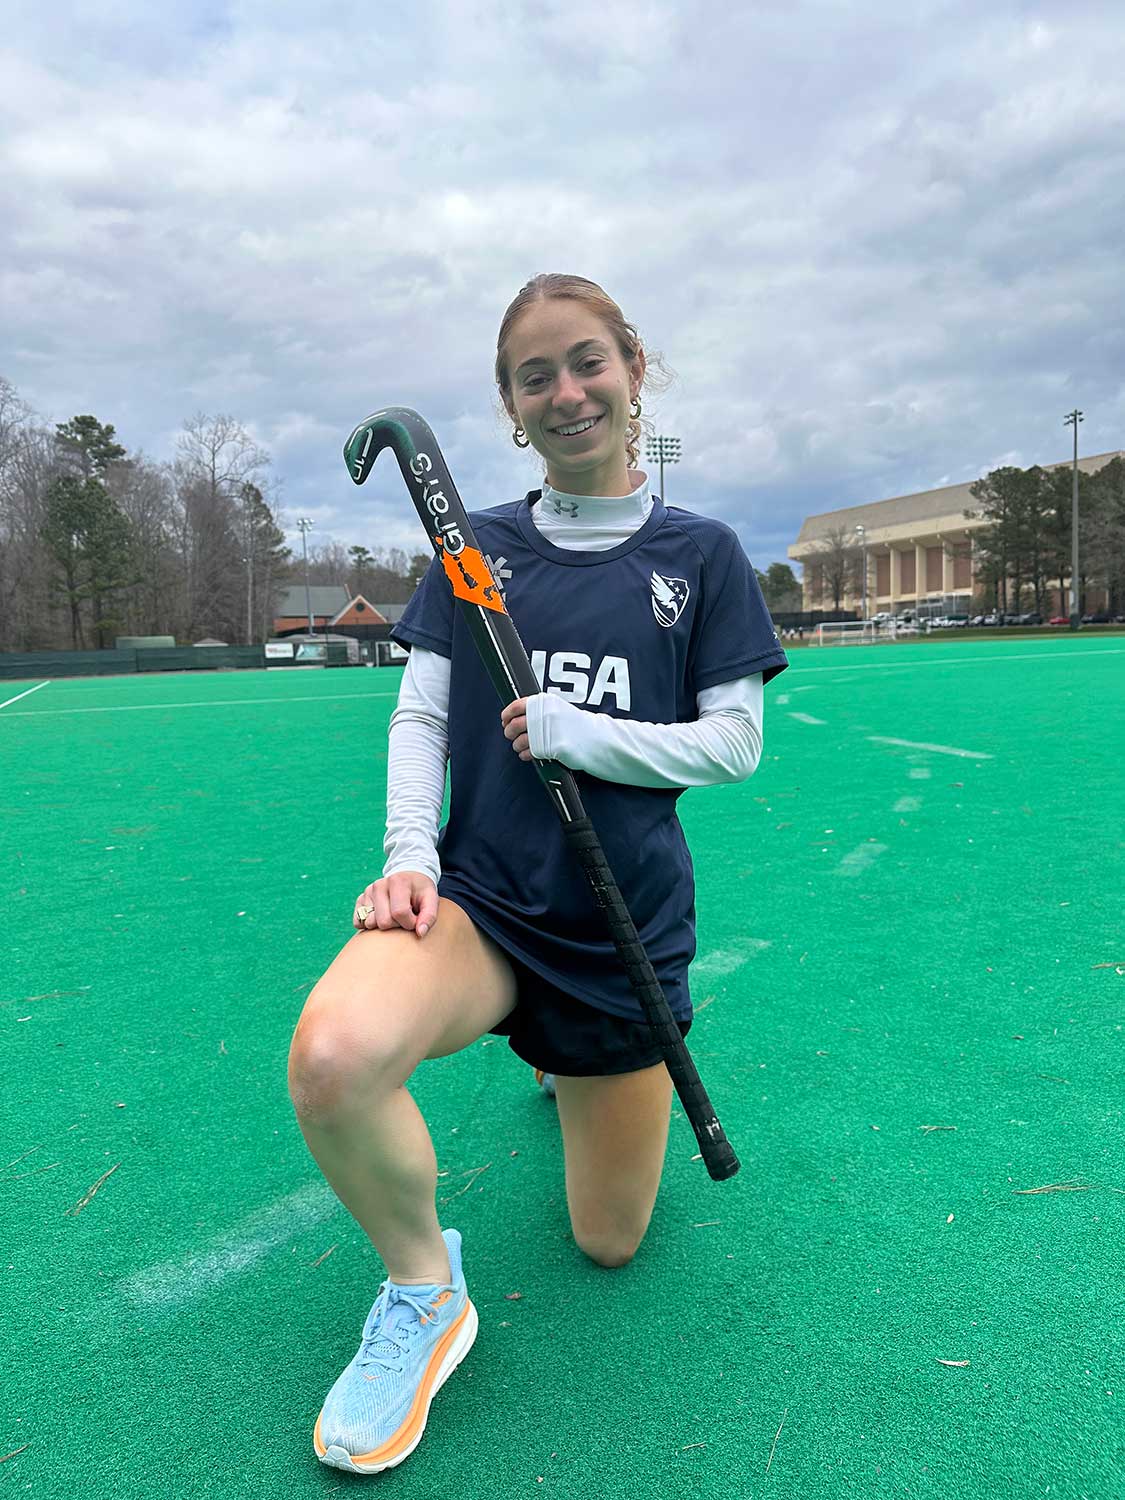 Field hockey player kneeling on the field holding a stick.